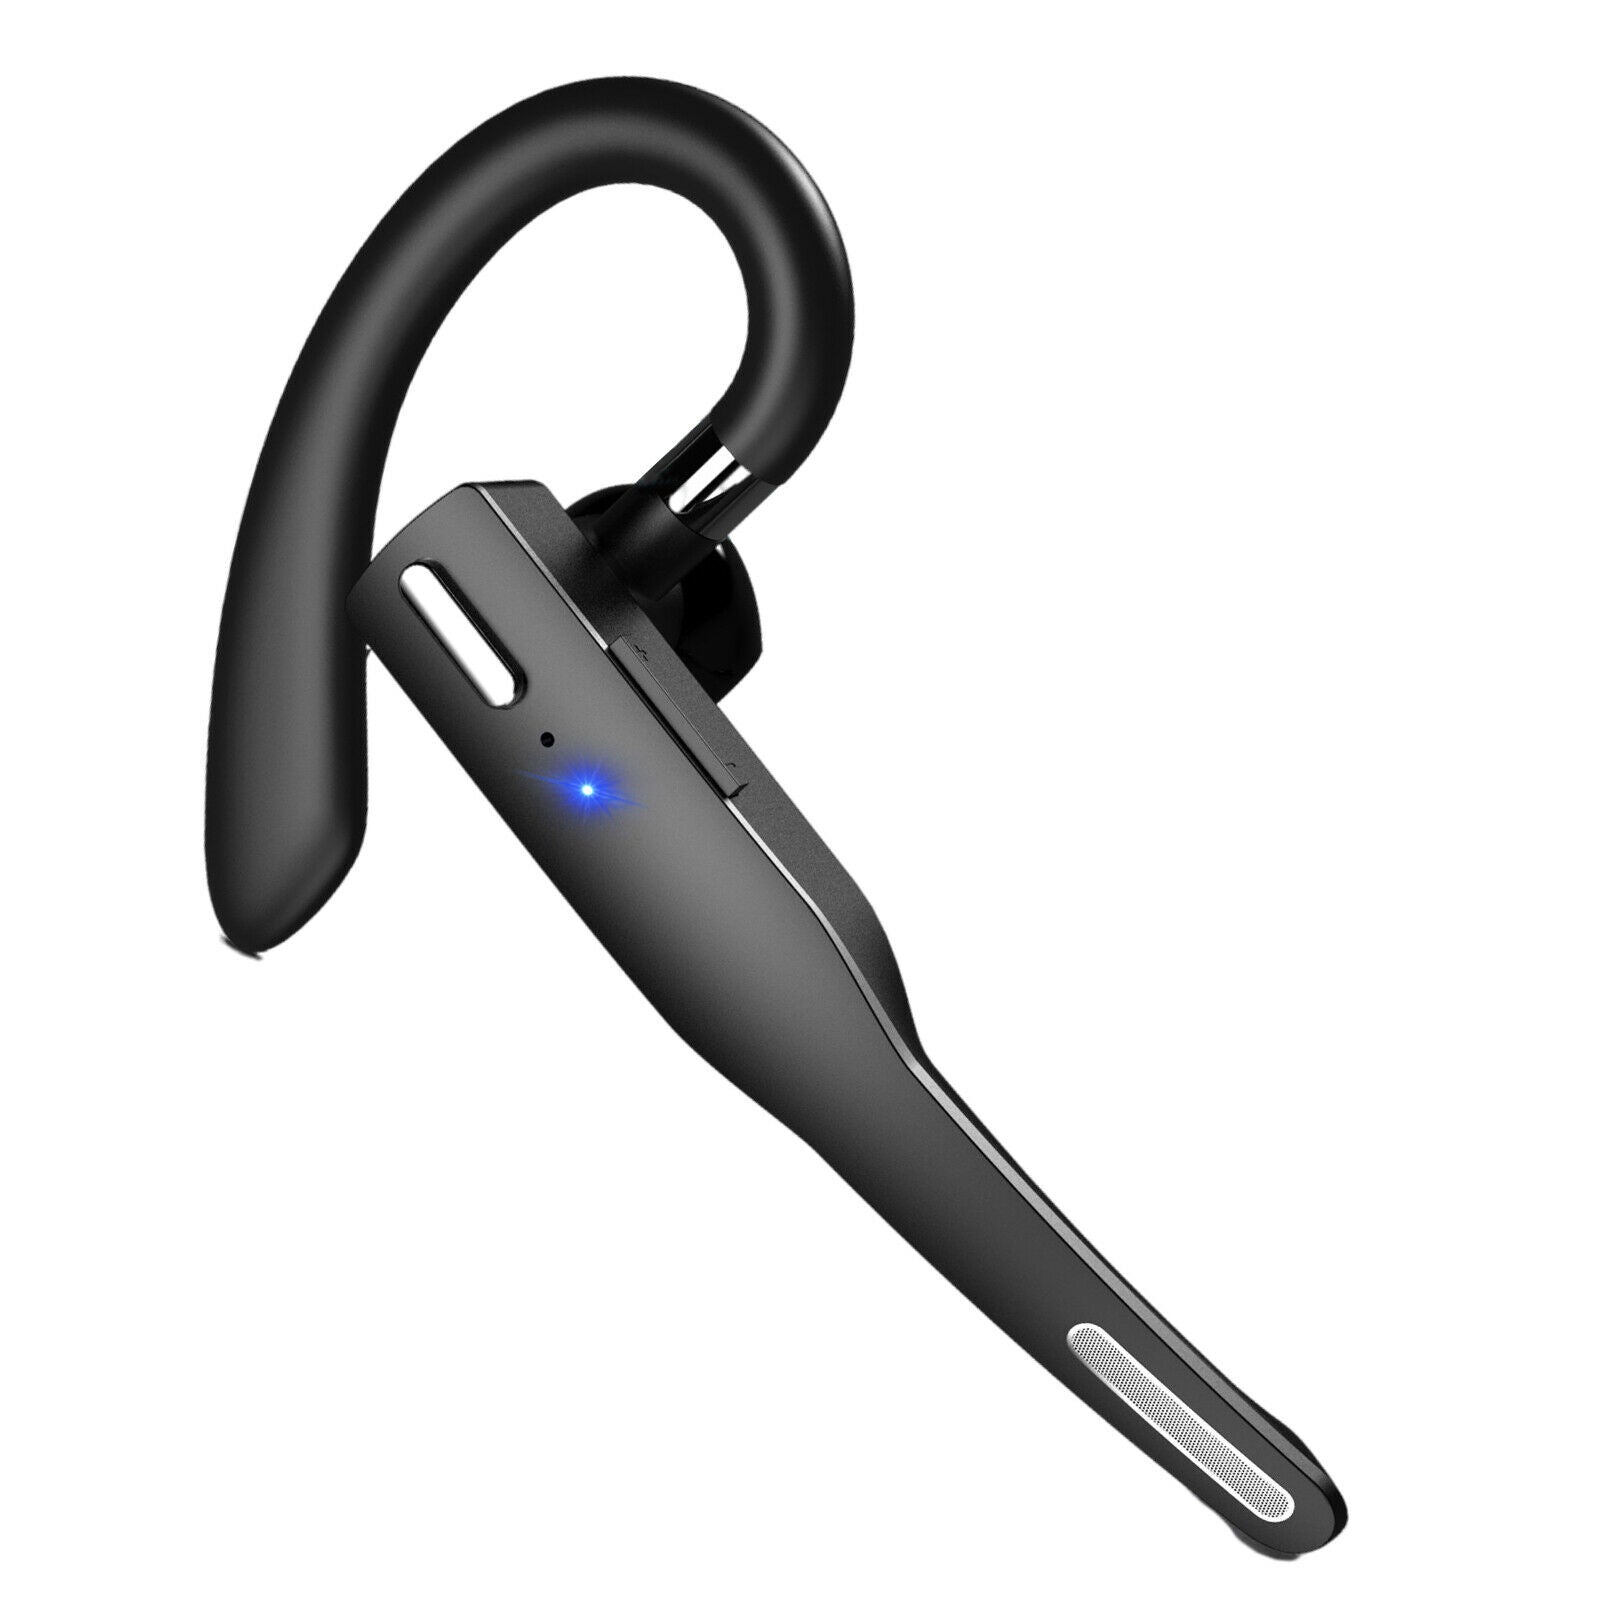 Bluetooth Earpiece V5.0 Hands-Free Headset for Cellphones Driving Business